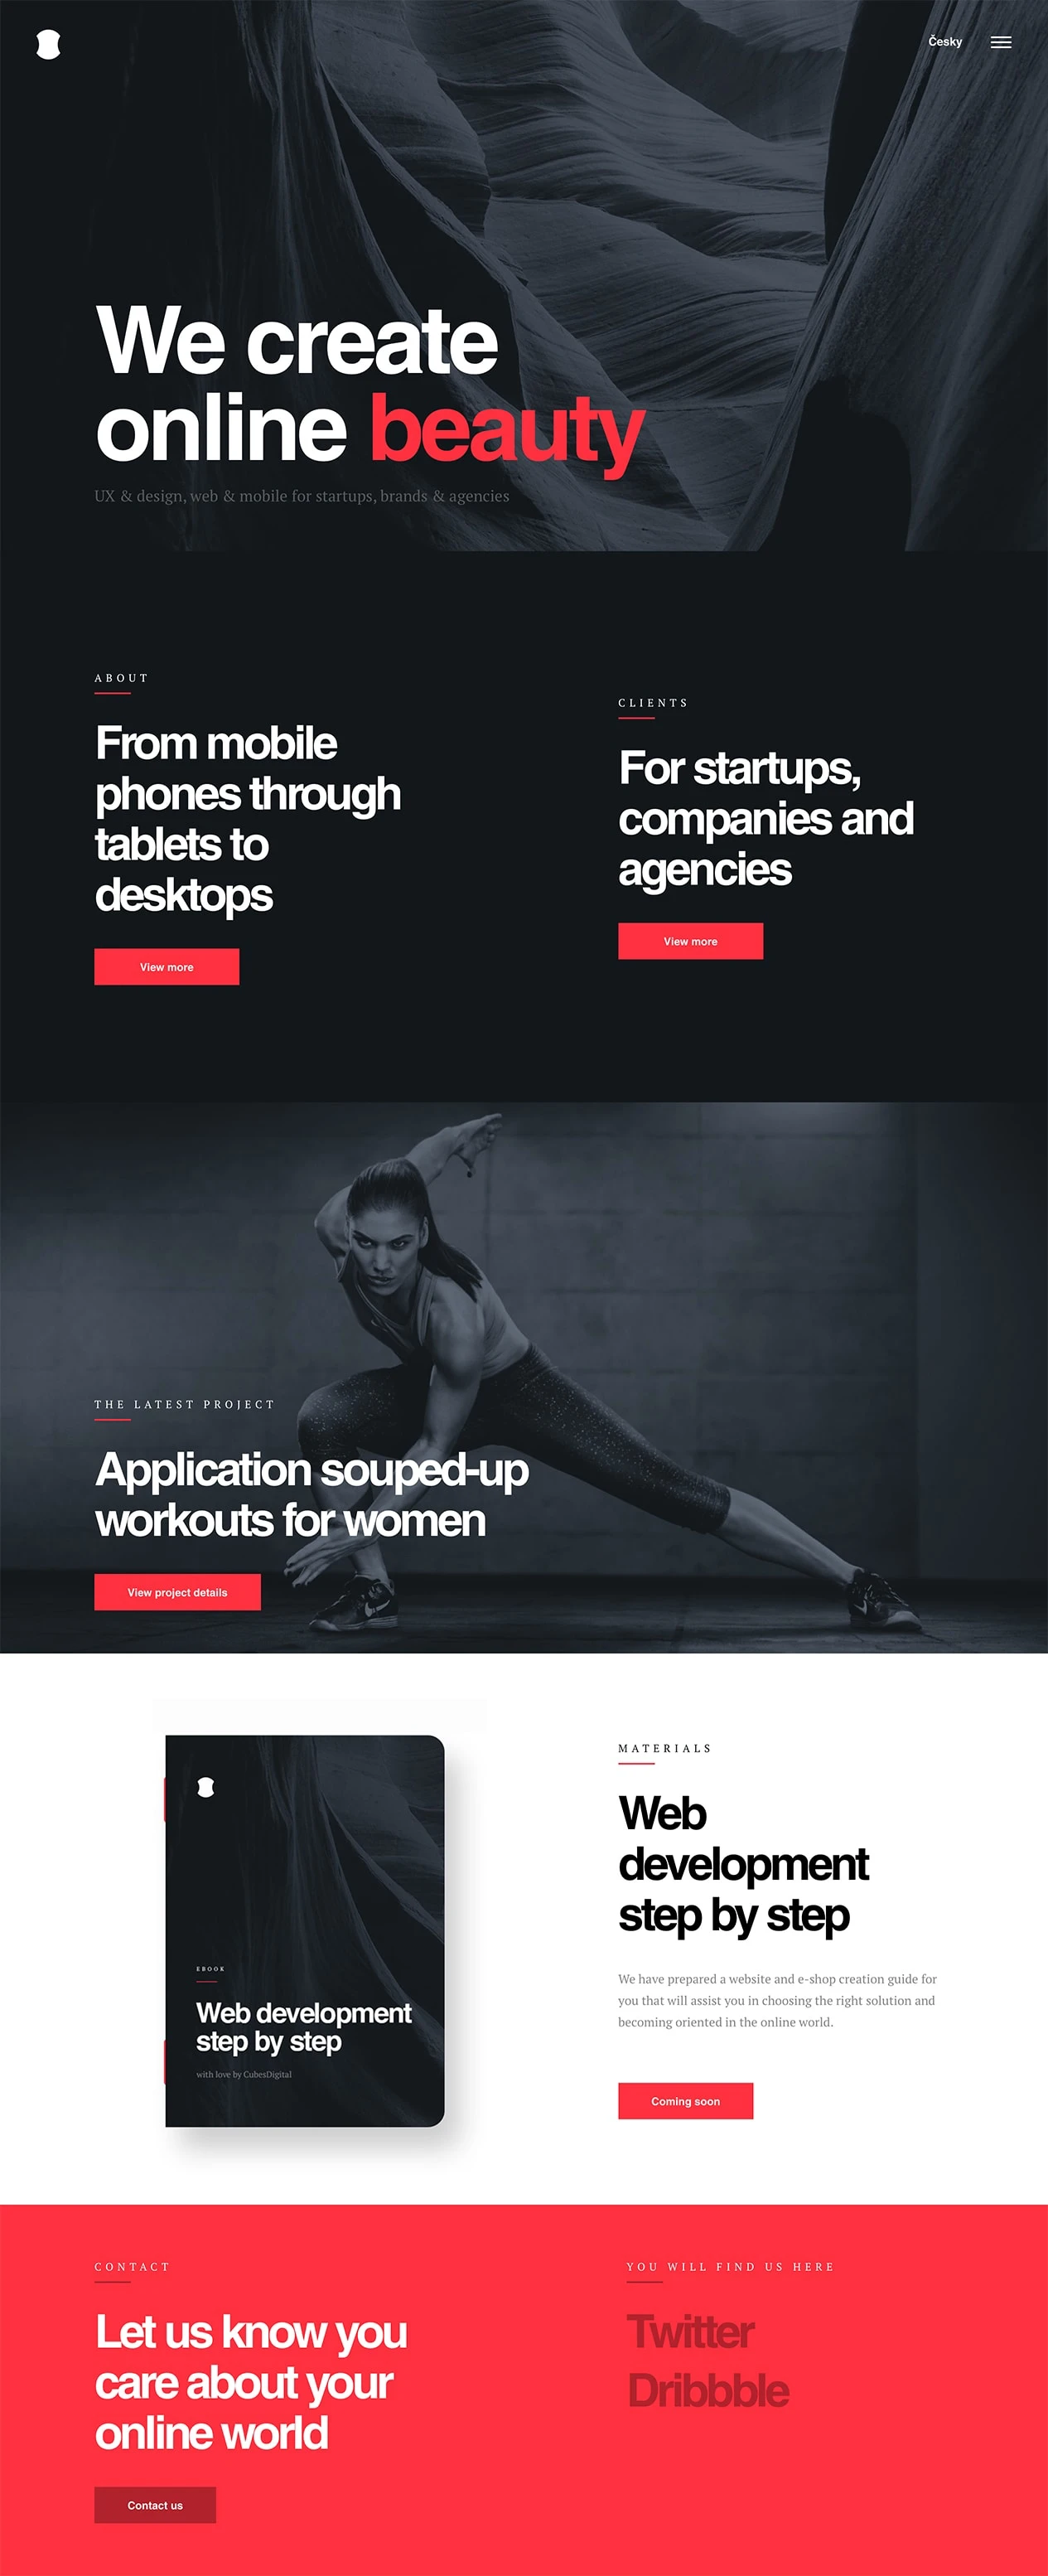 Cubes Digital Landing Page Example: We combine design and technologies to create a complex of functions and beauty in every product we deliver to startups and companies. We are specialists in UX, graphic design, web, and mobile.